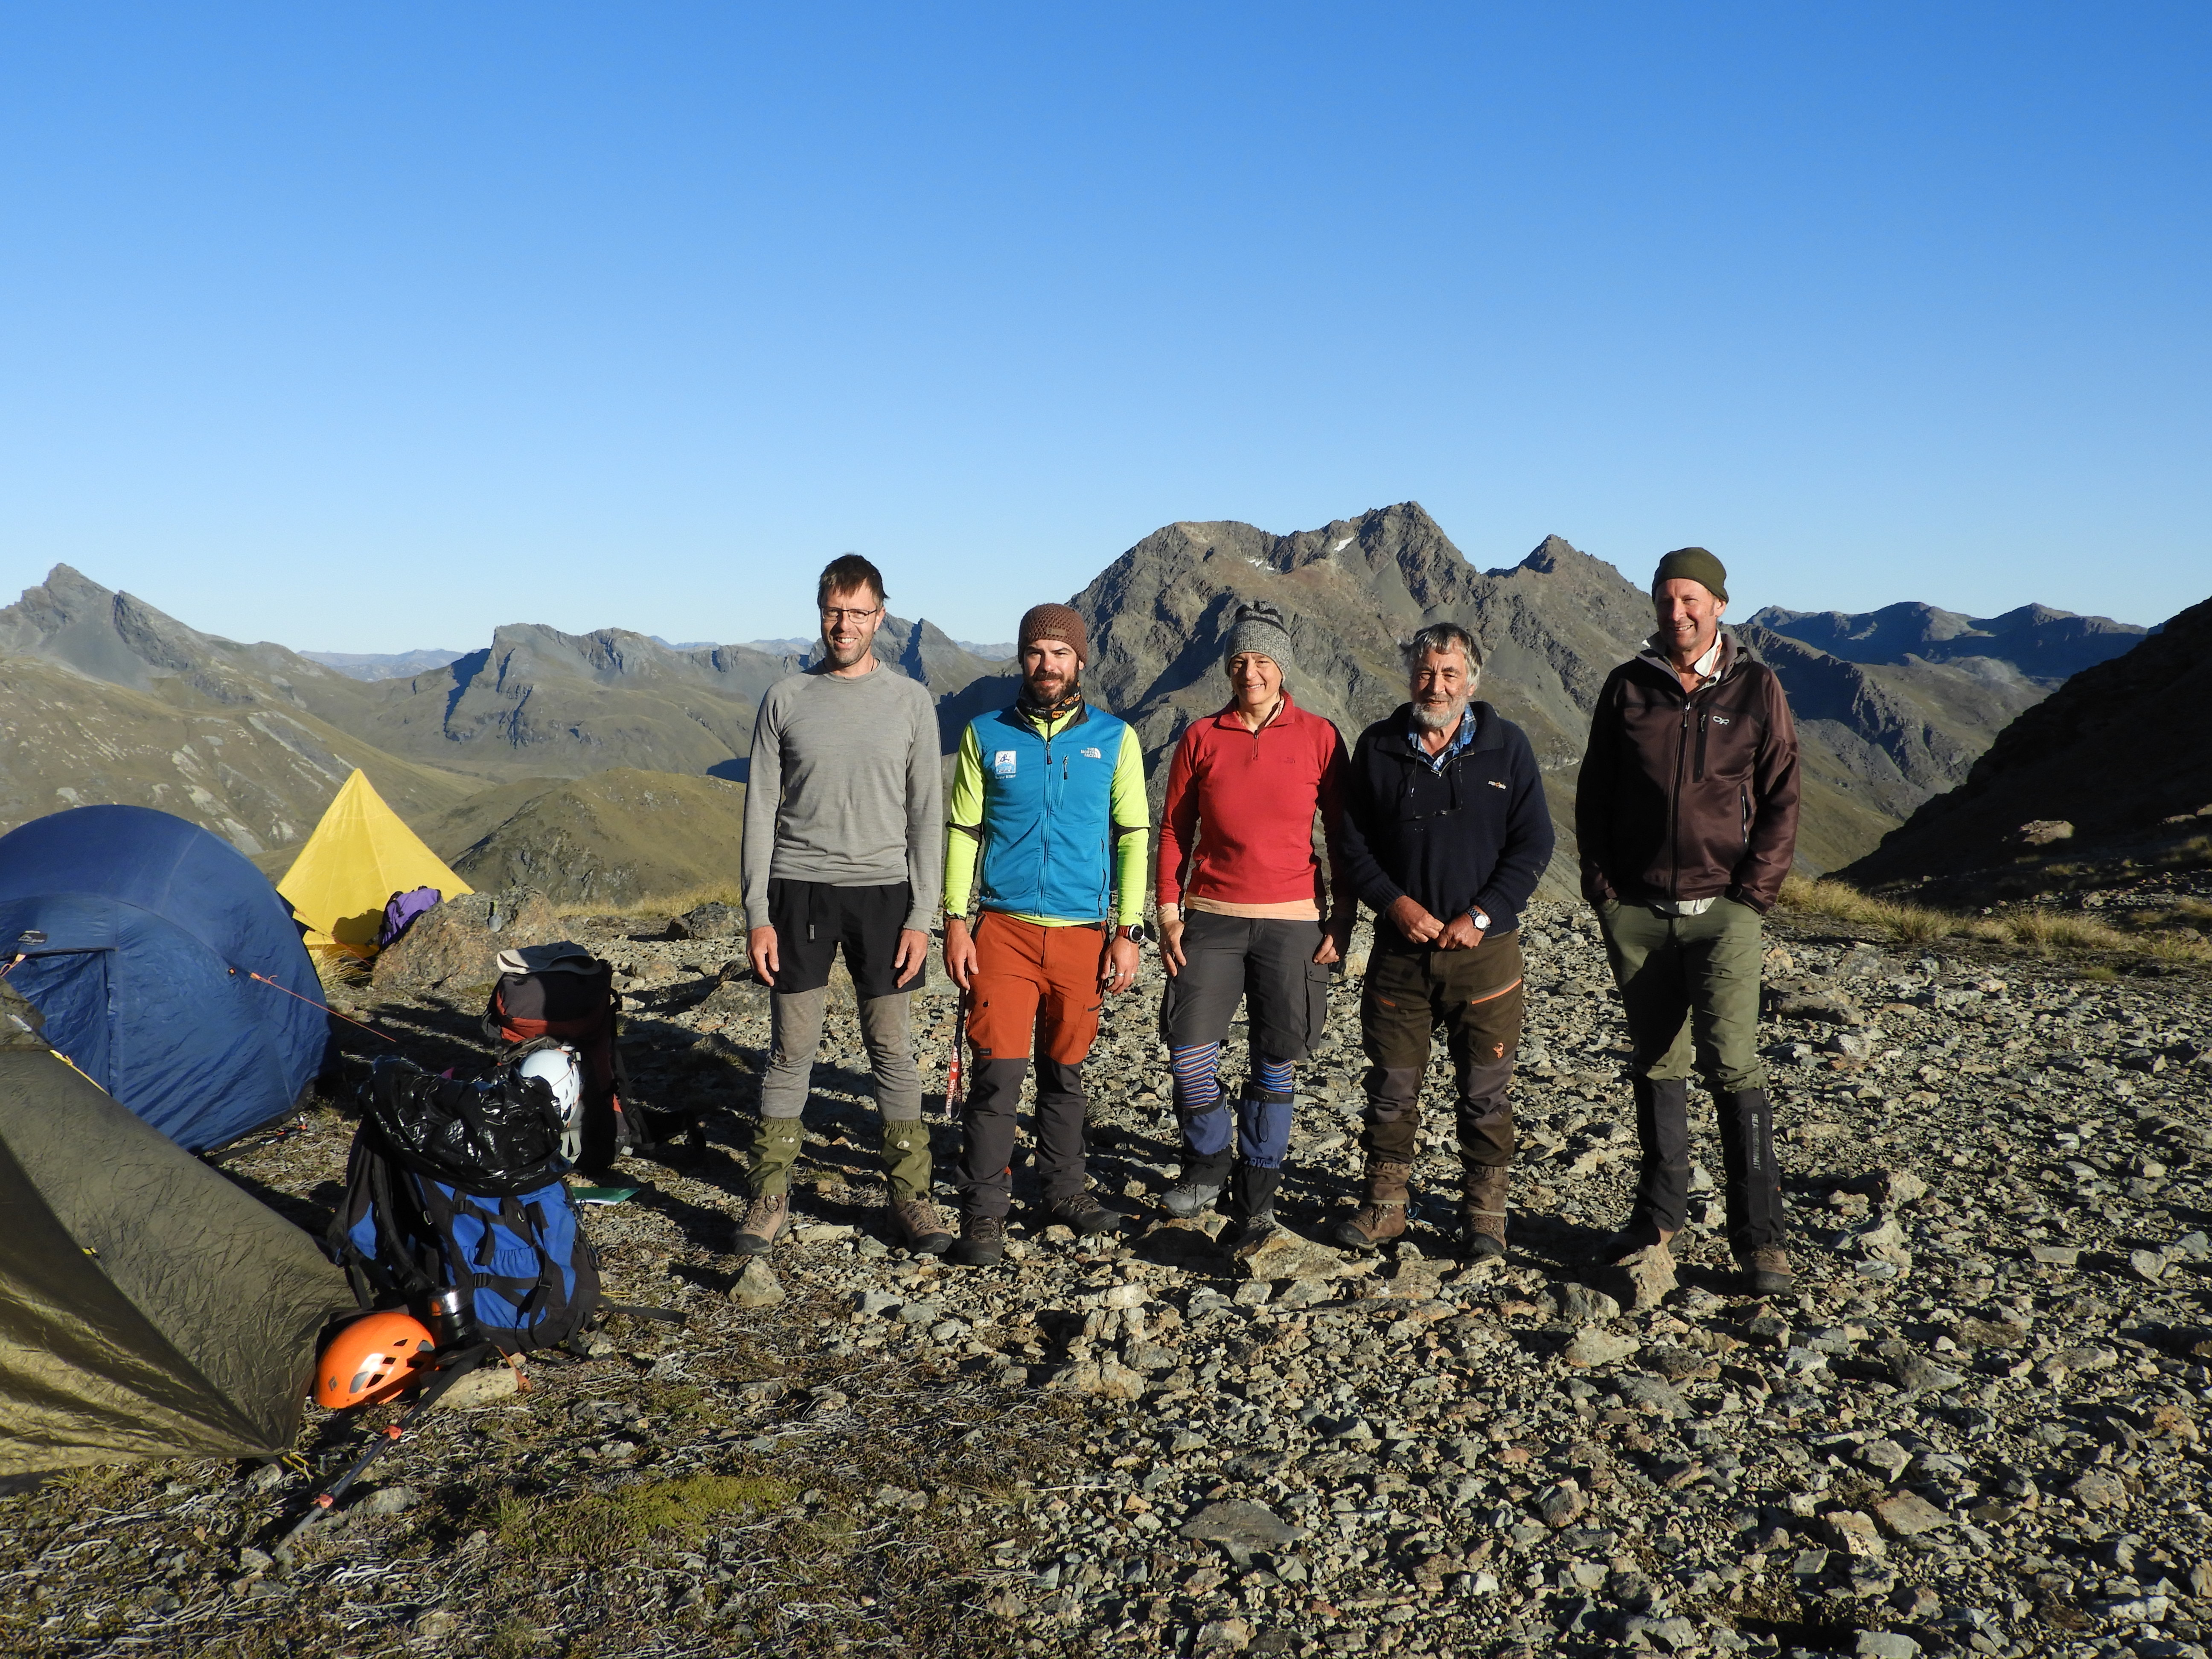 Five people in hiking gear standing next to tents with mountain ranges and blue sky behind them